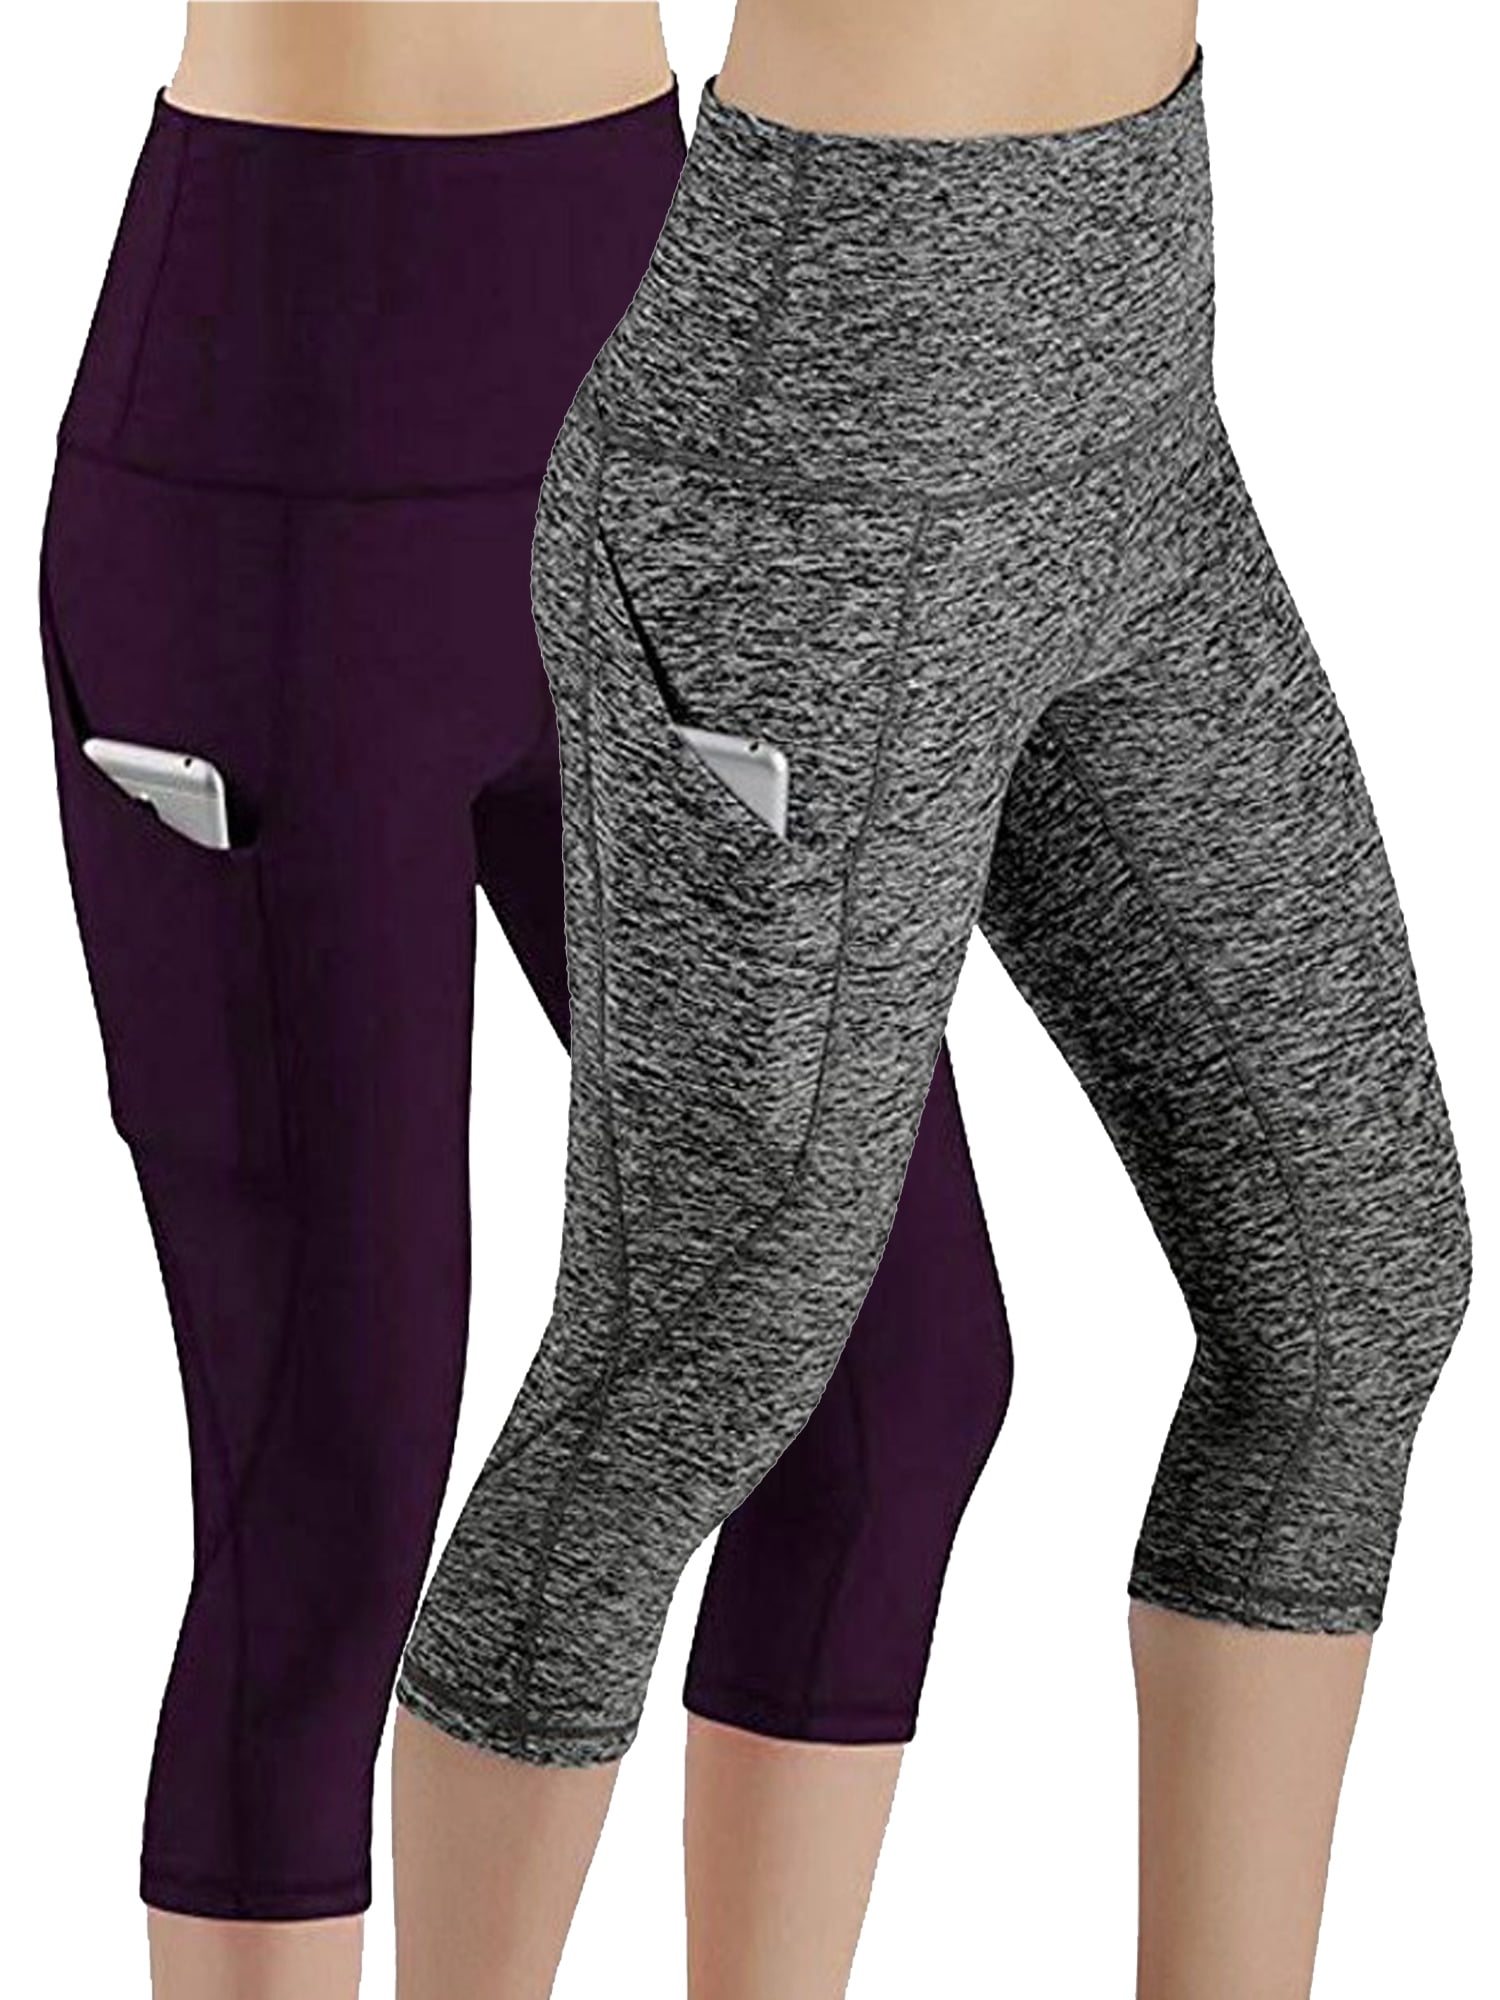 Women's High Waist Yoga 3/4 Cropped Leggings with 2 Pockets Tummy Control Pants 